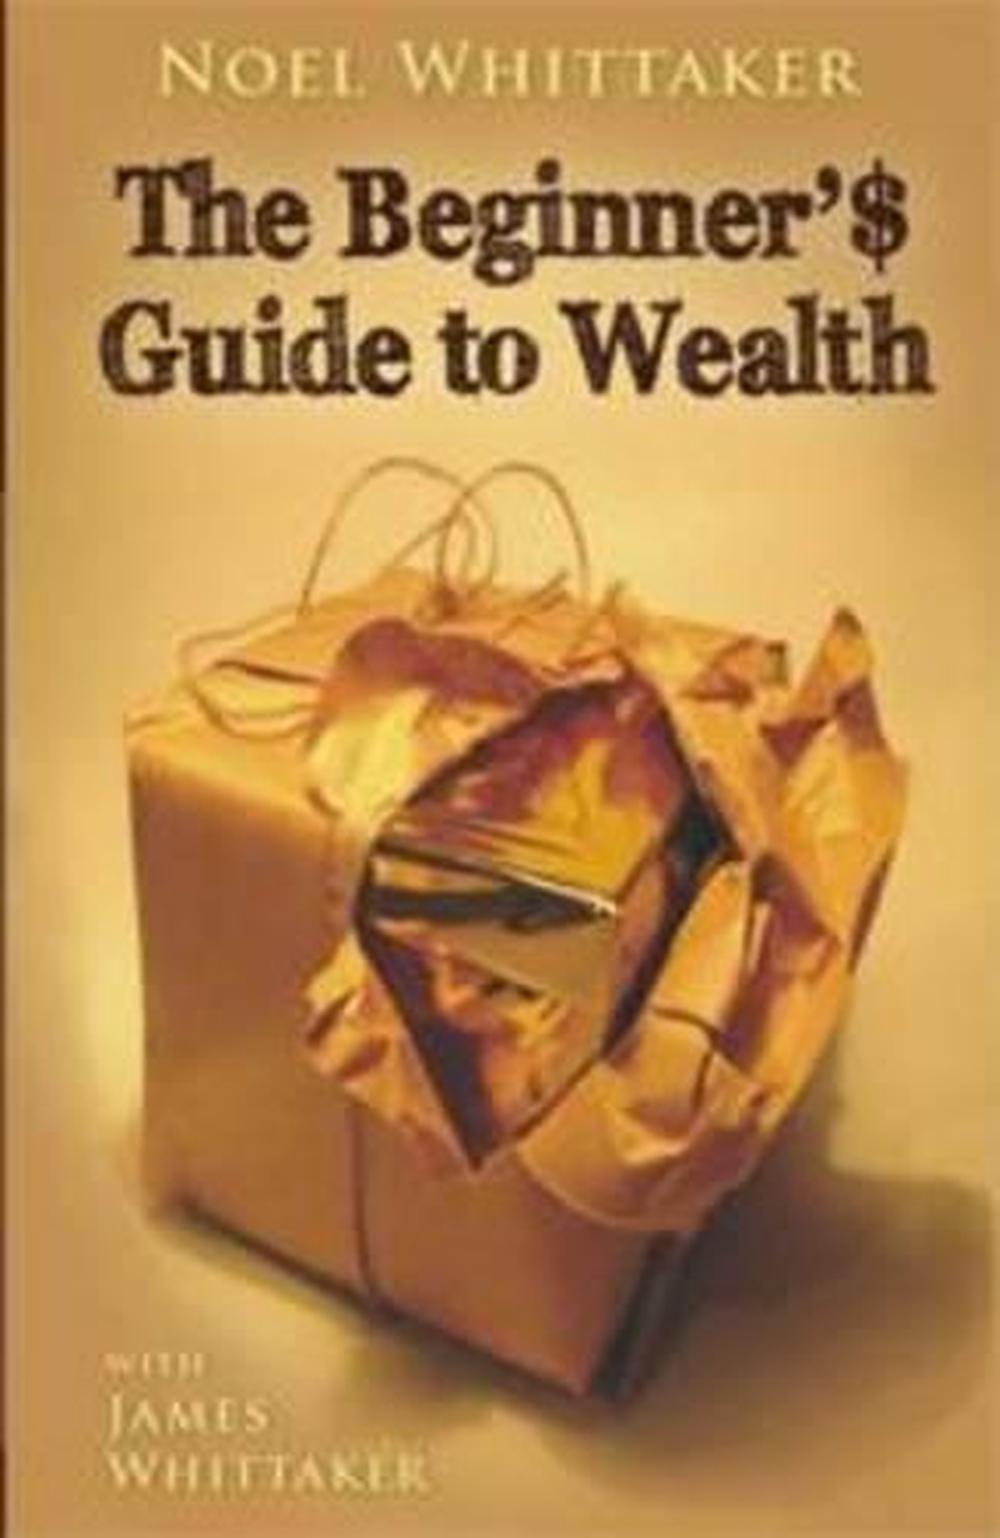 wealth plan book review